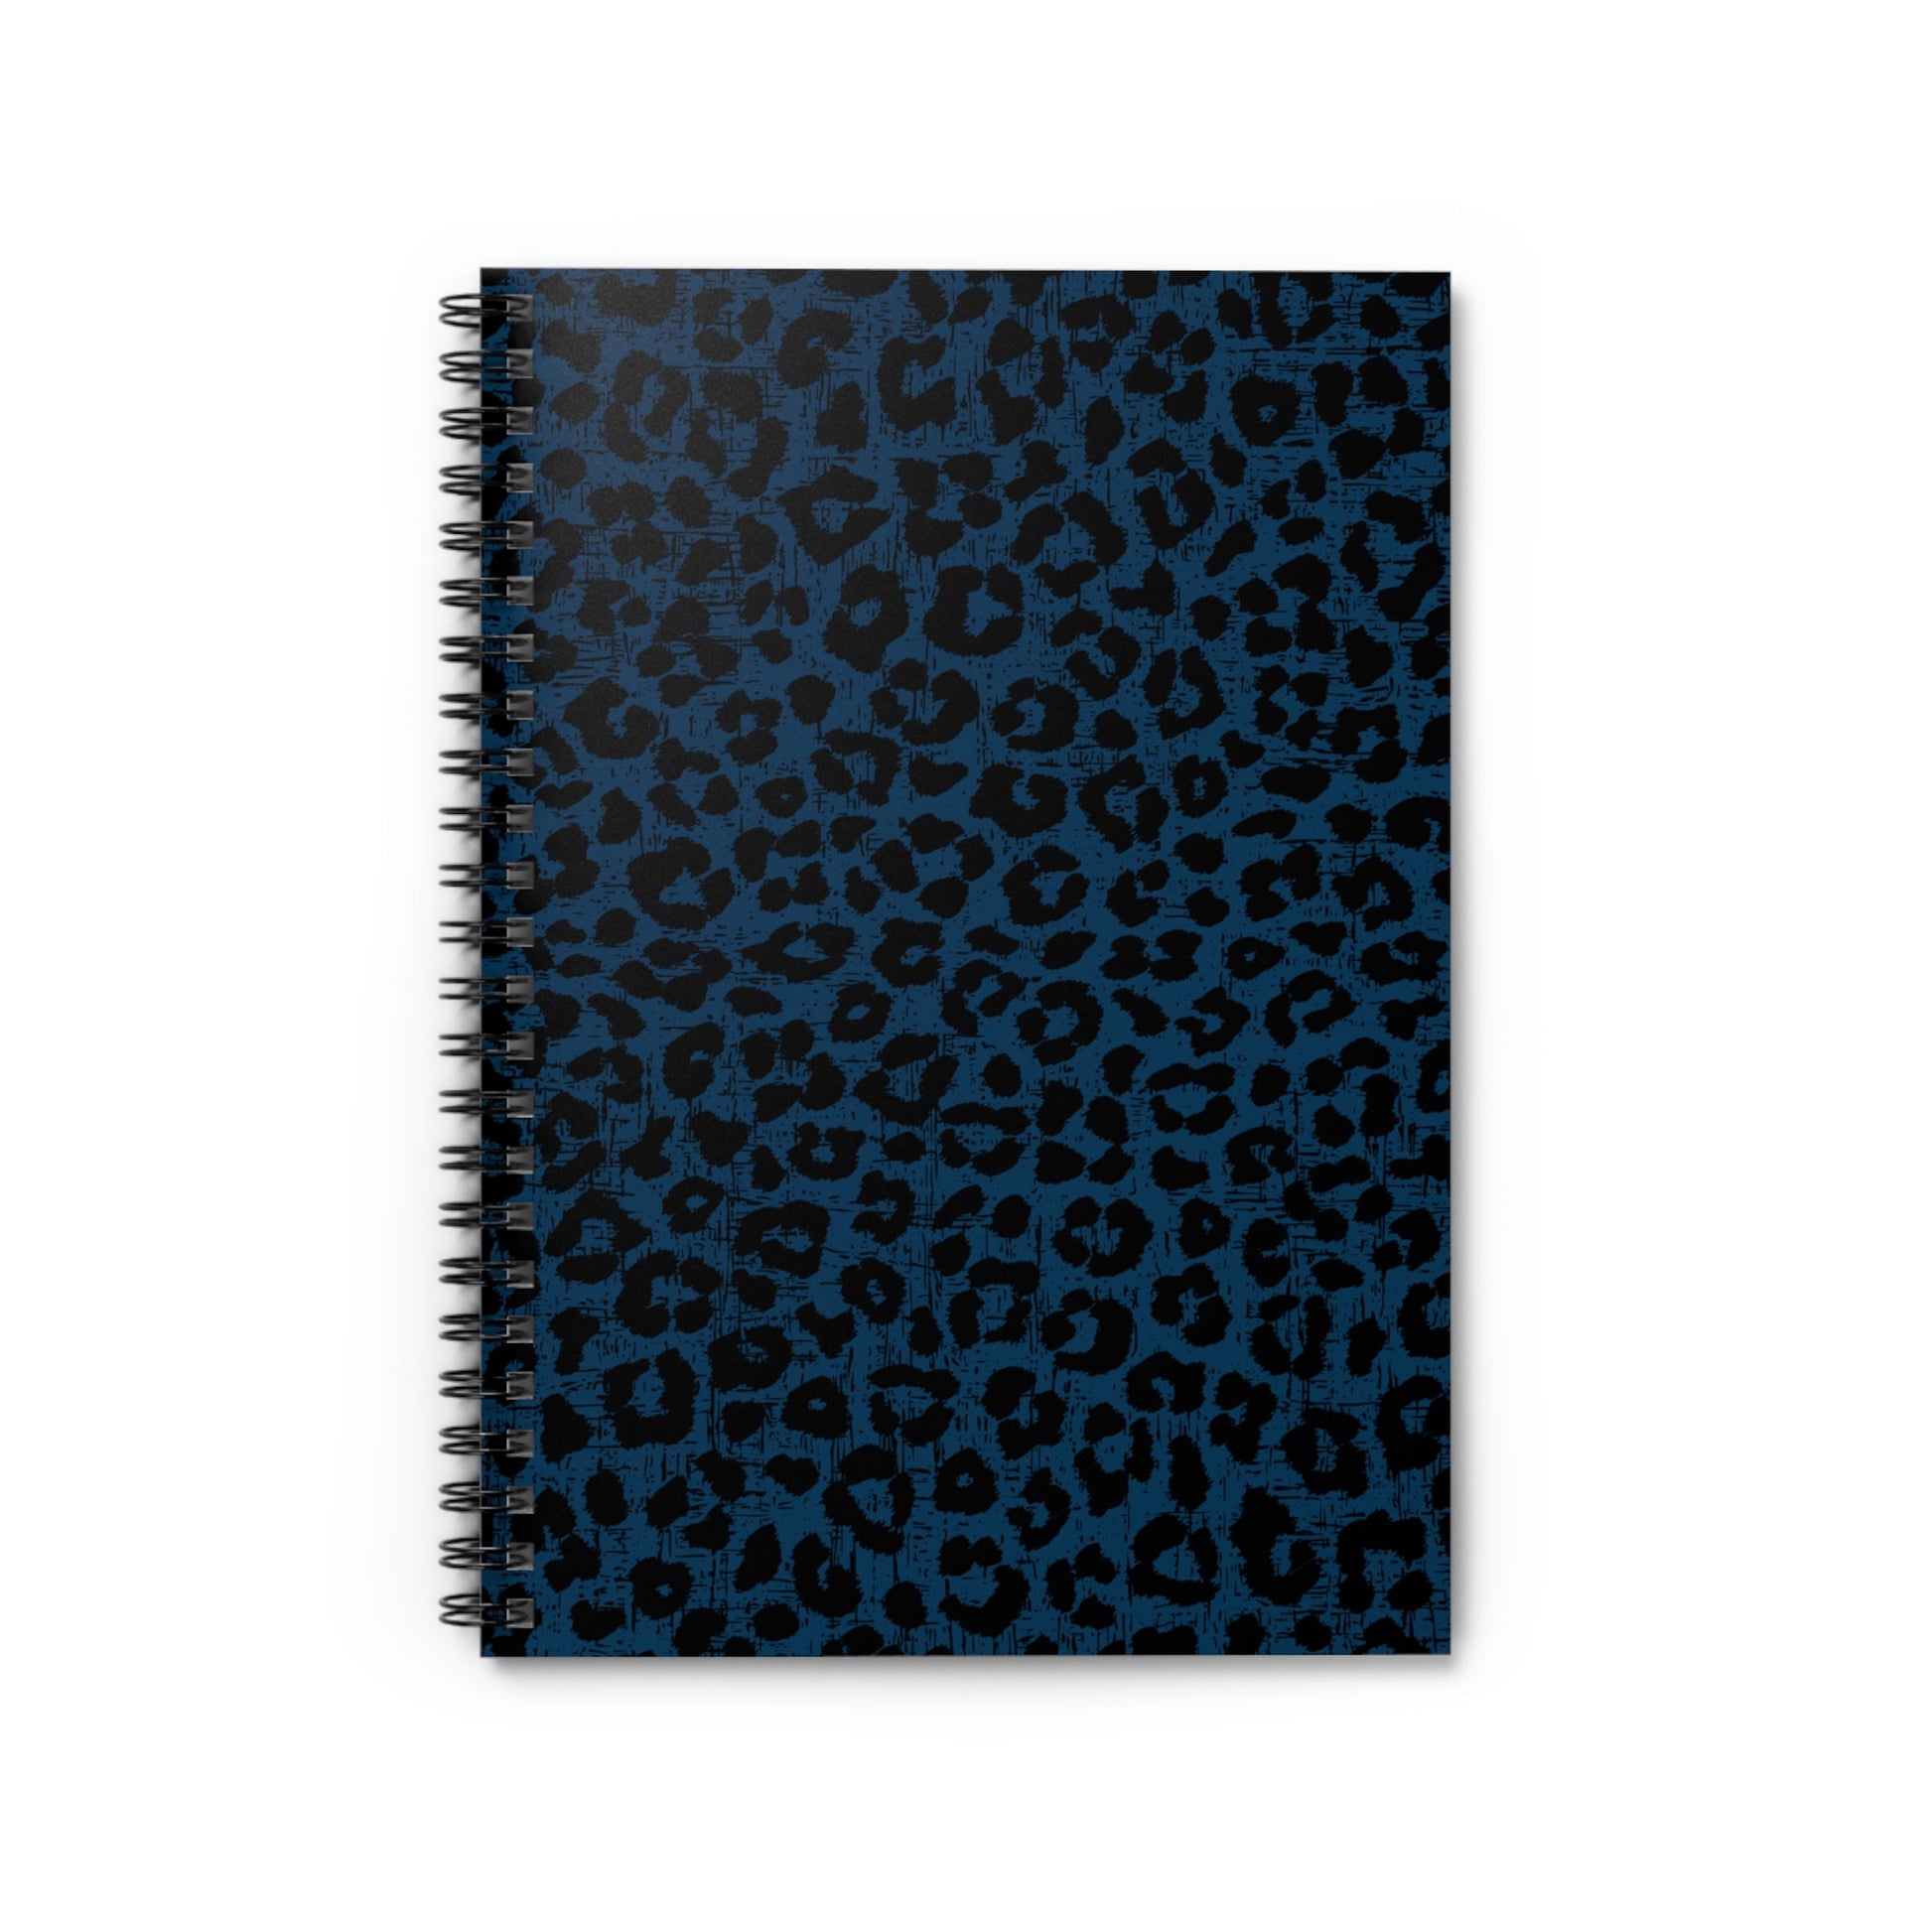 Blue and Black Leopard Print Spiral Notebook - Ruled Line: Stylish Animal Pattern Design - Eddy and Rita